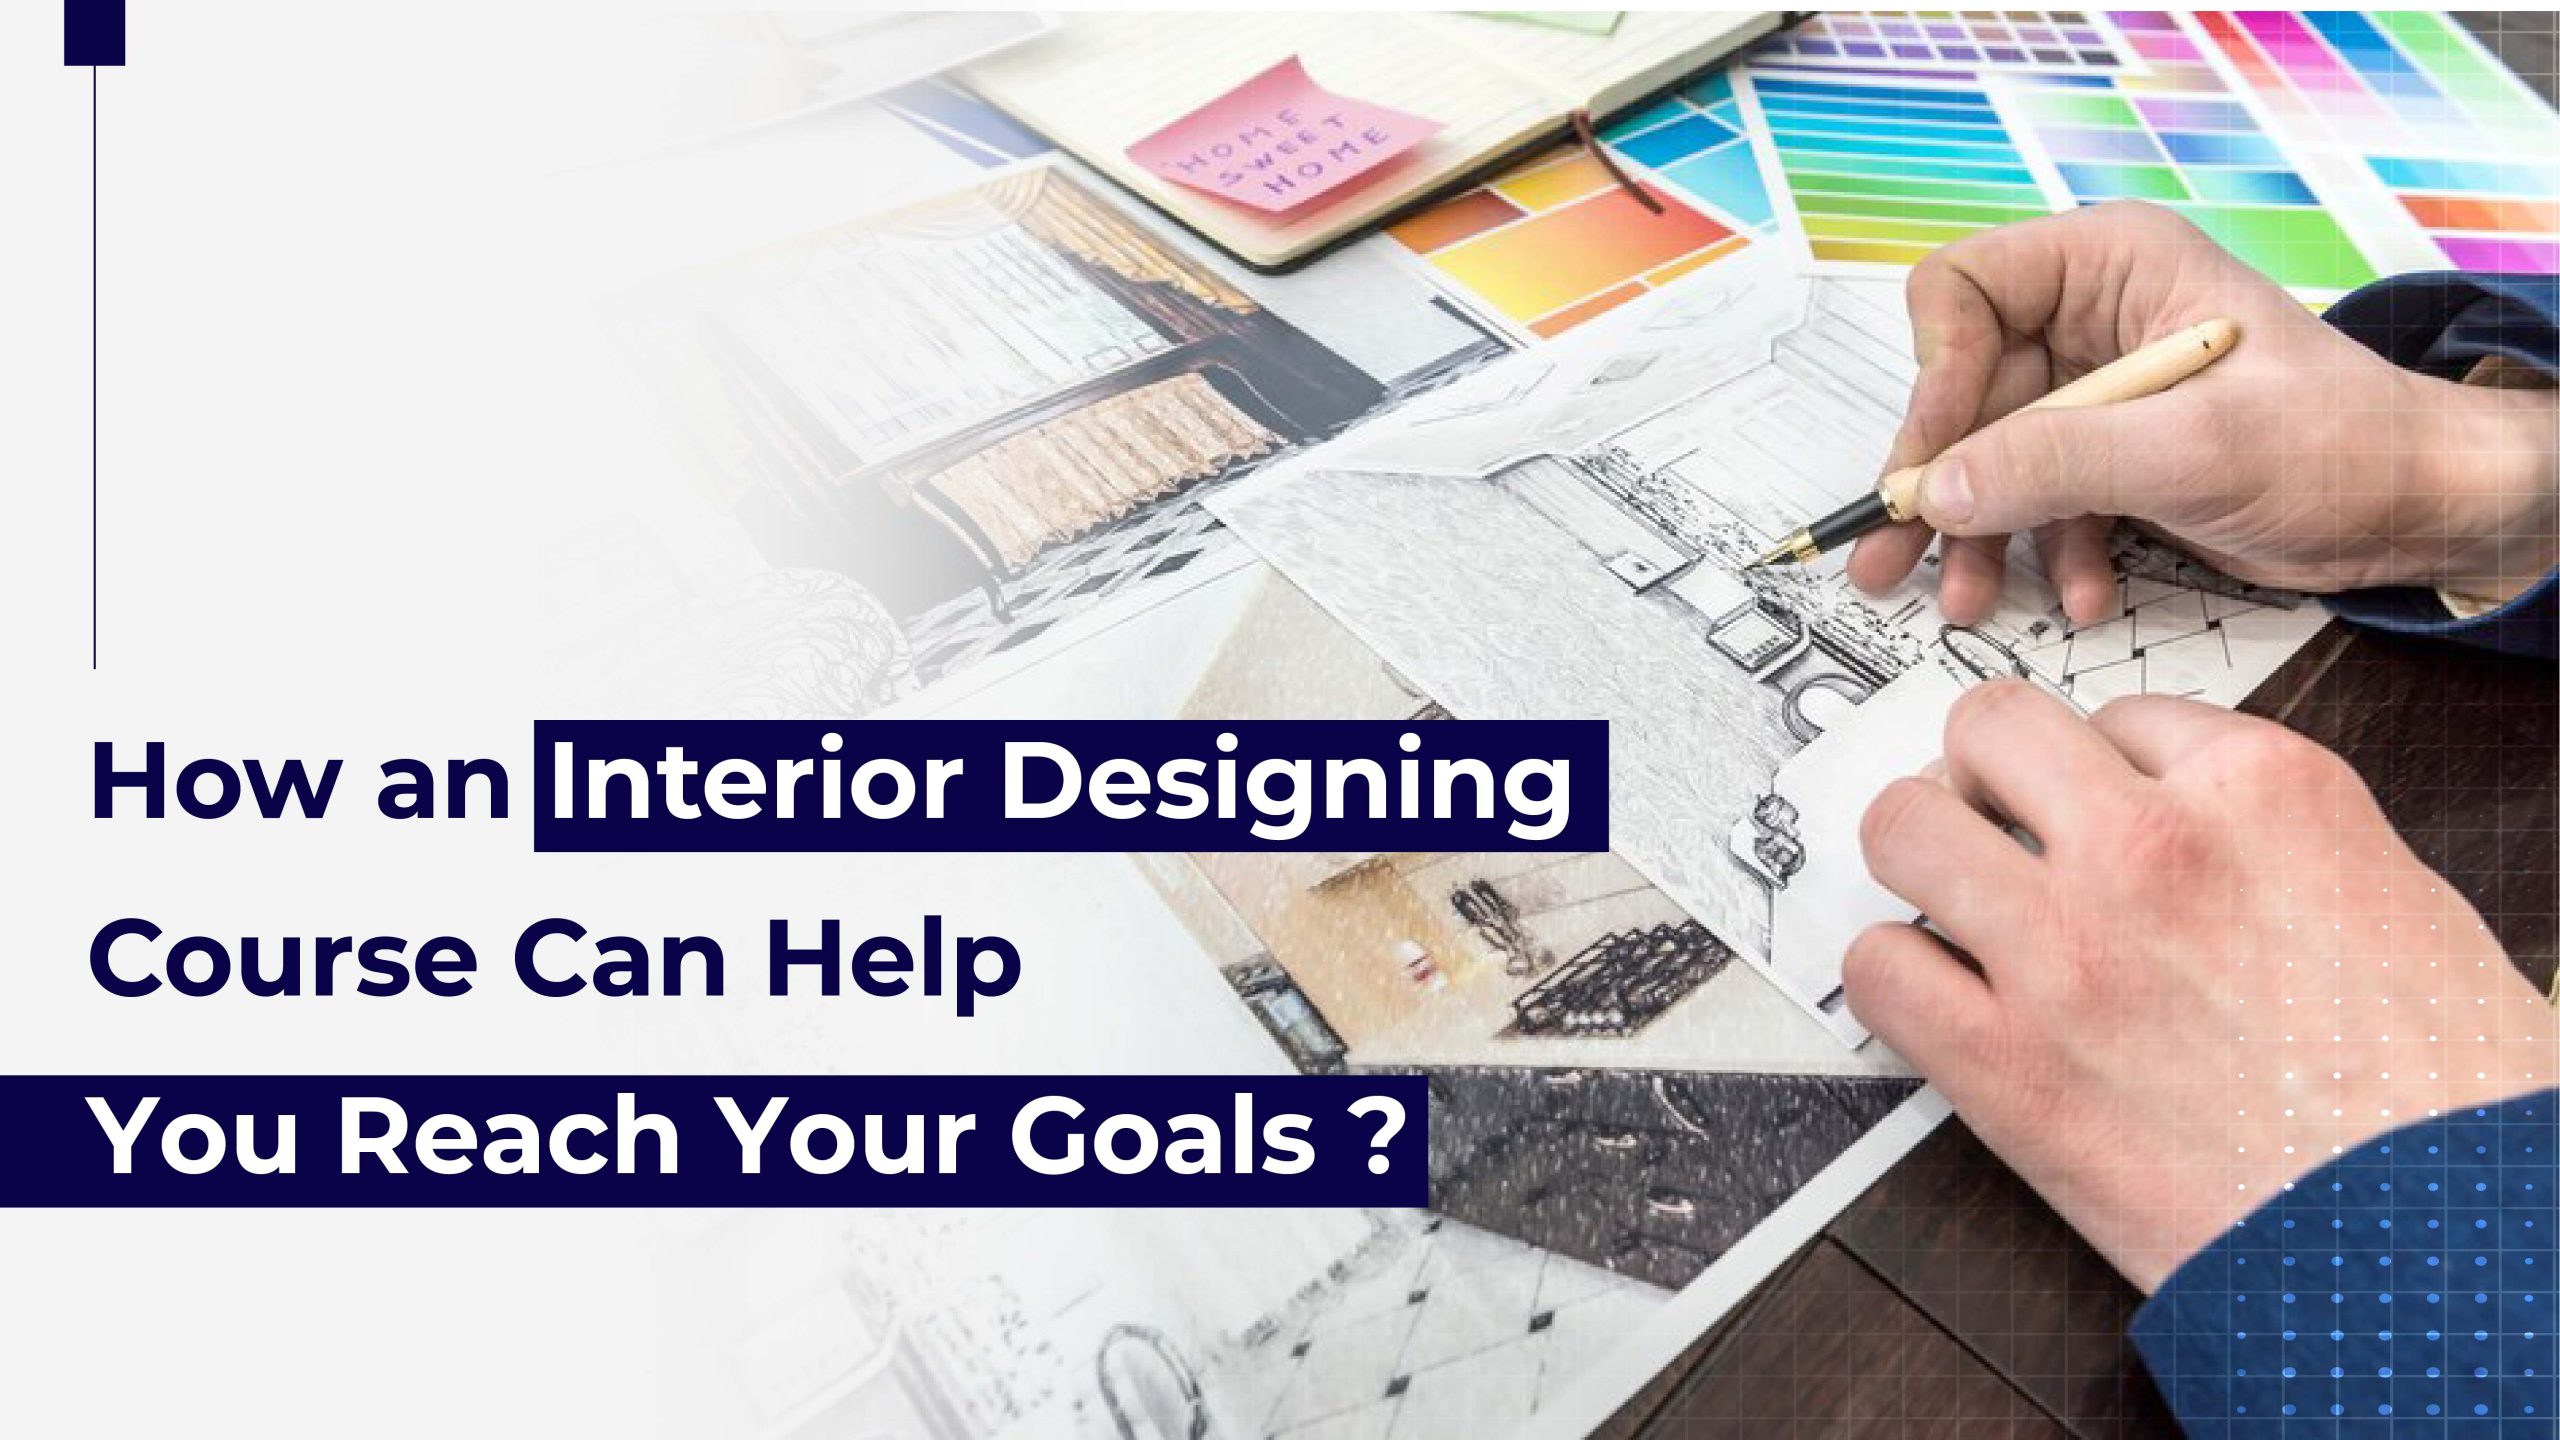 How An Interior Designing Course Can Help You Reach Your Goals?